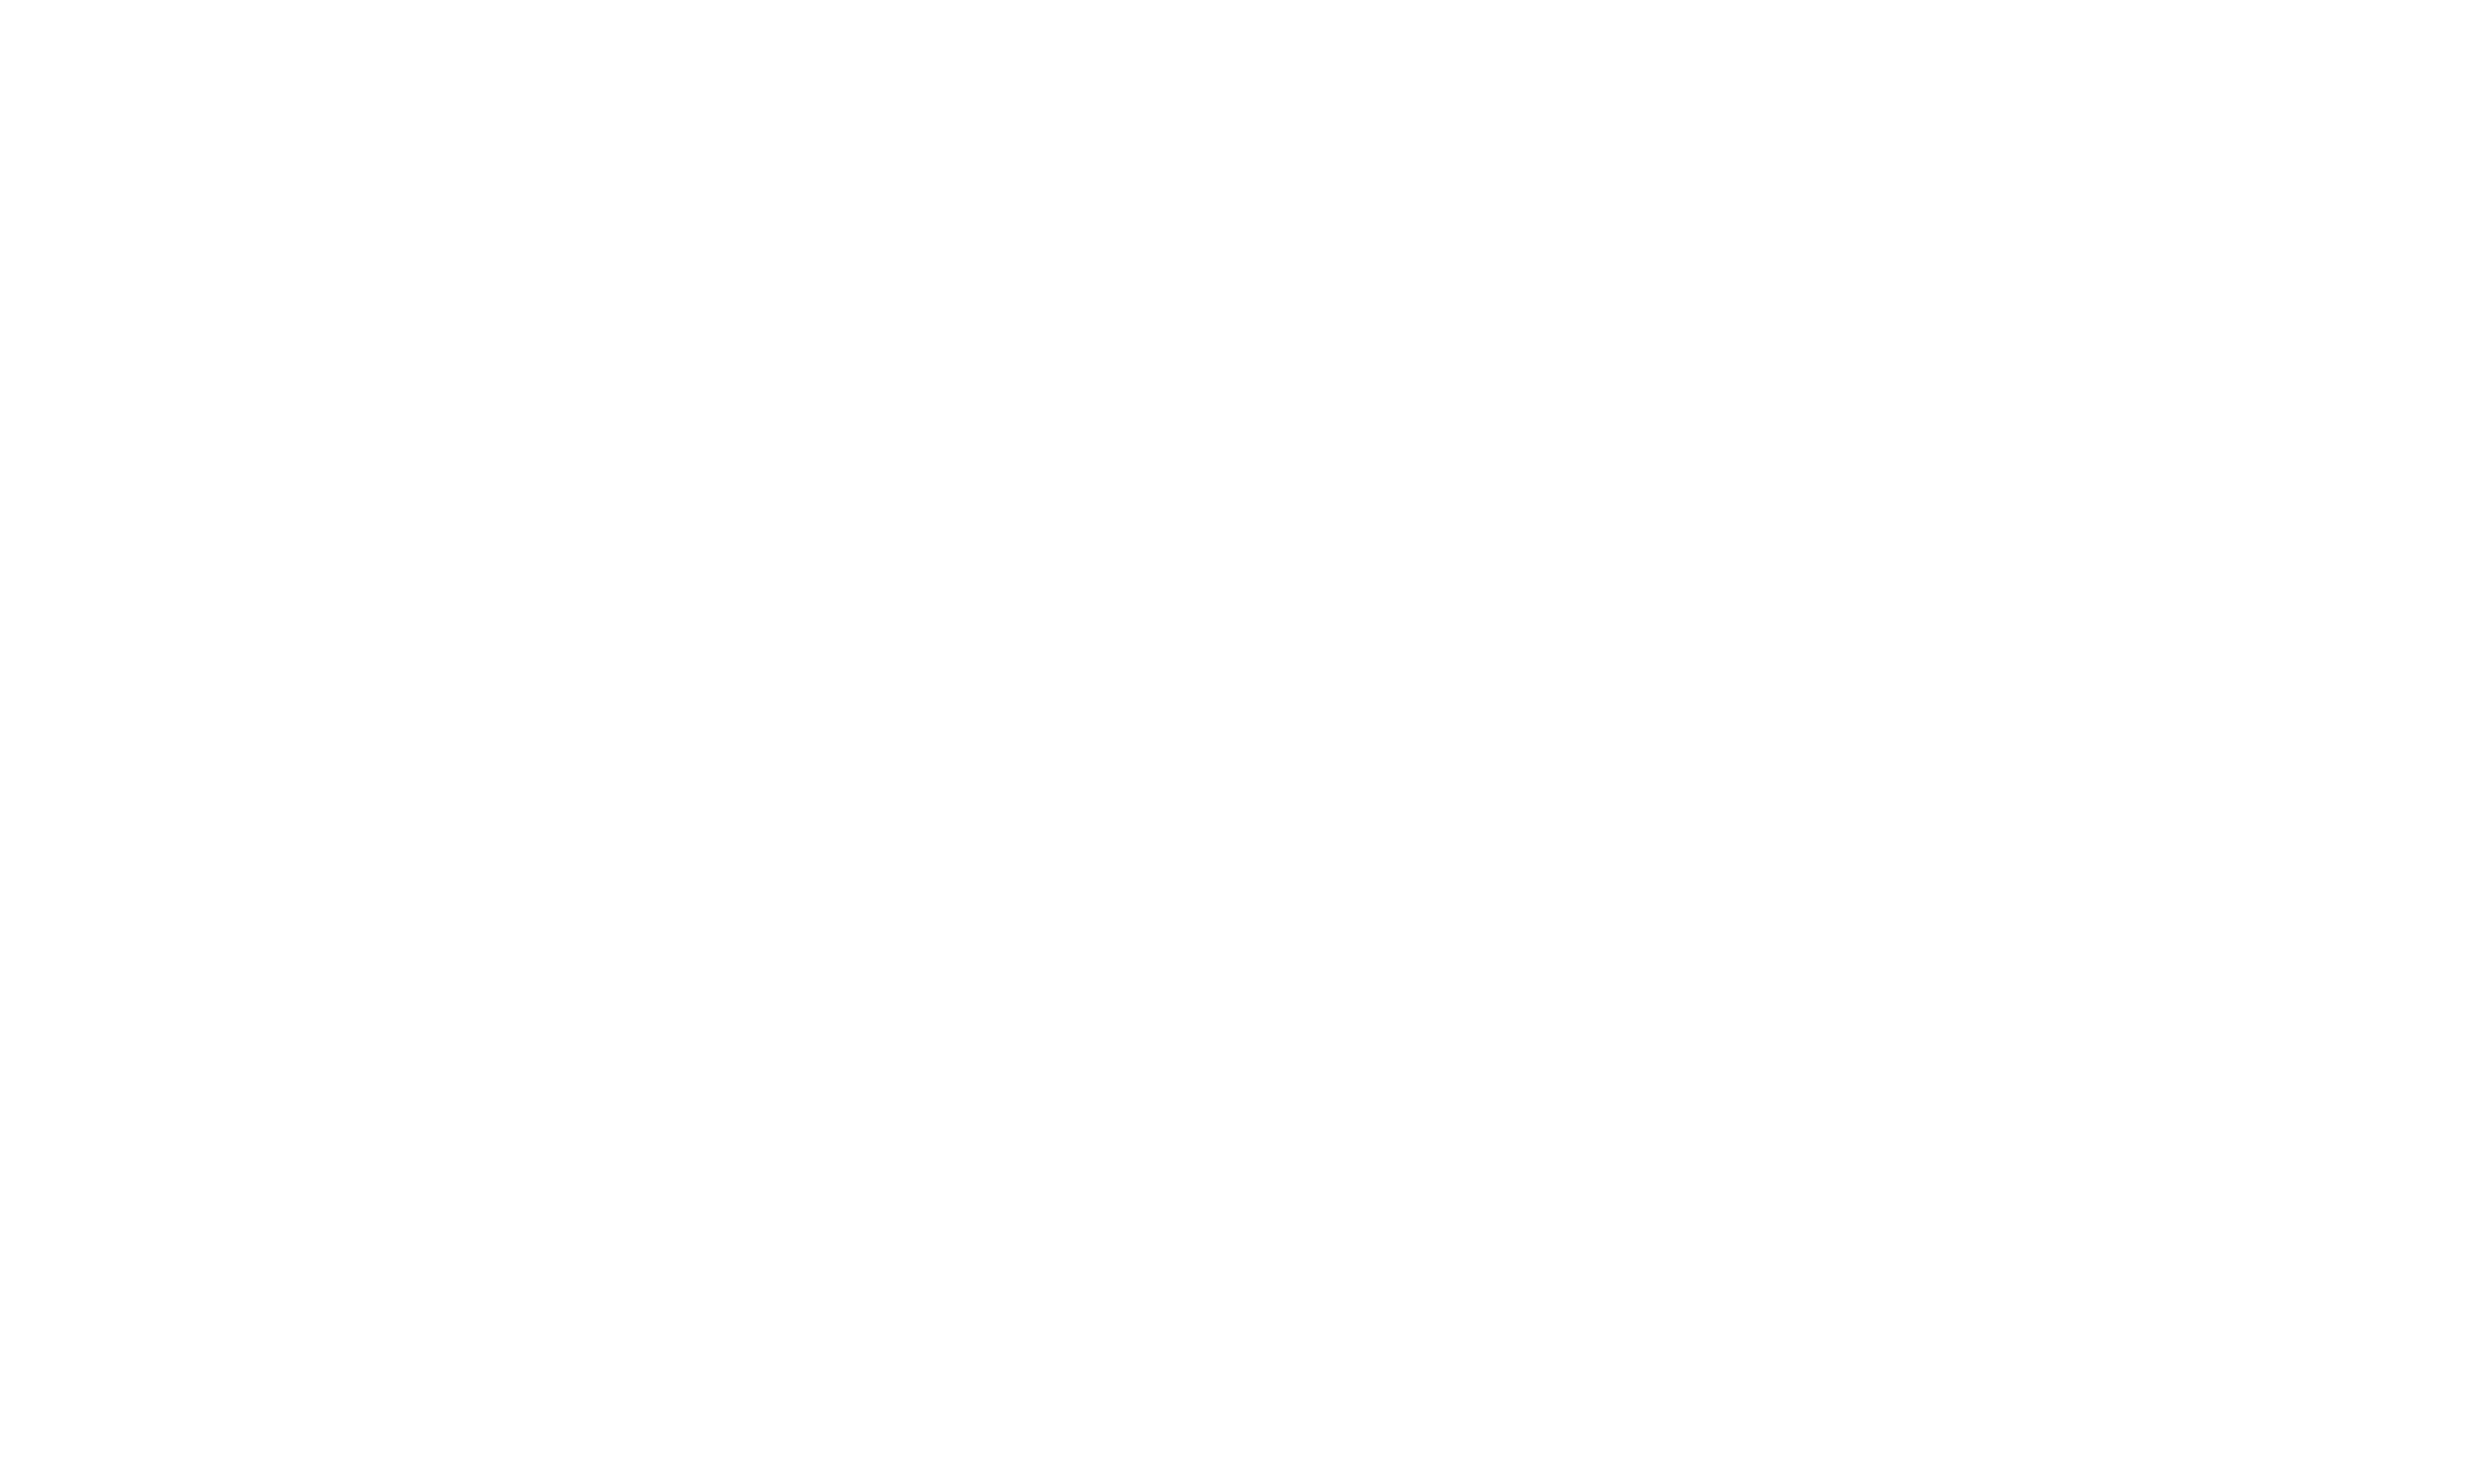 PMM Security & Automation